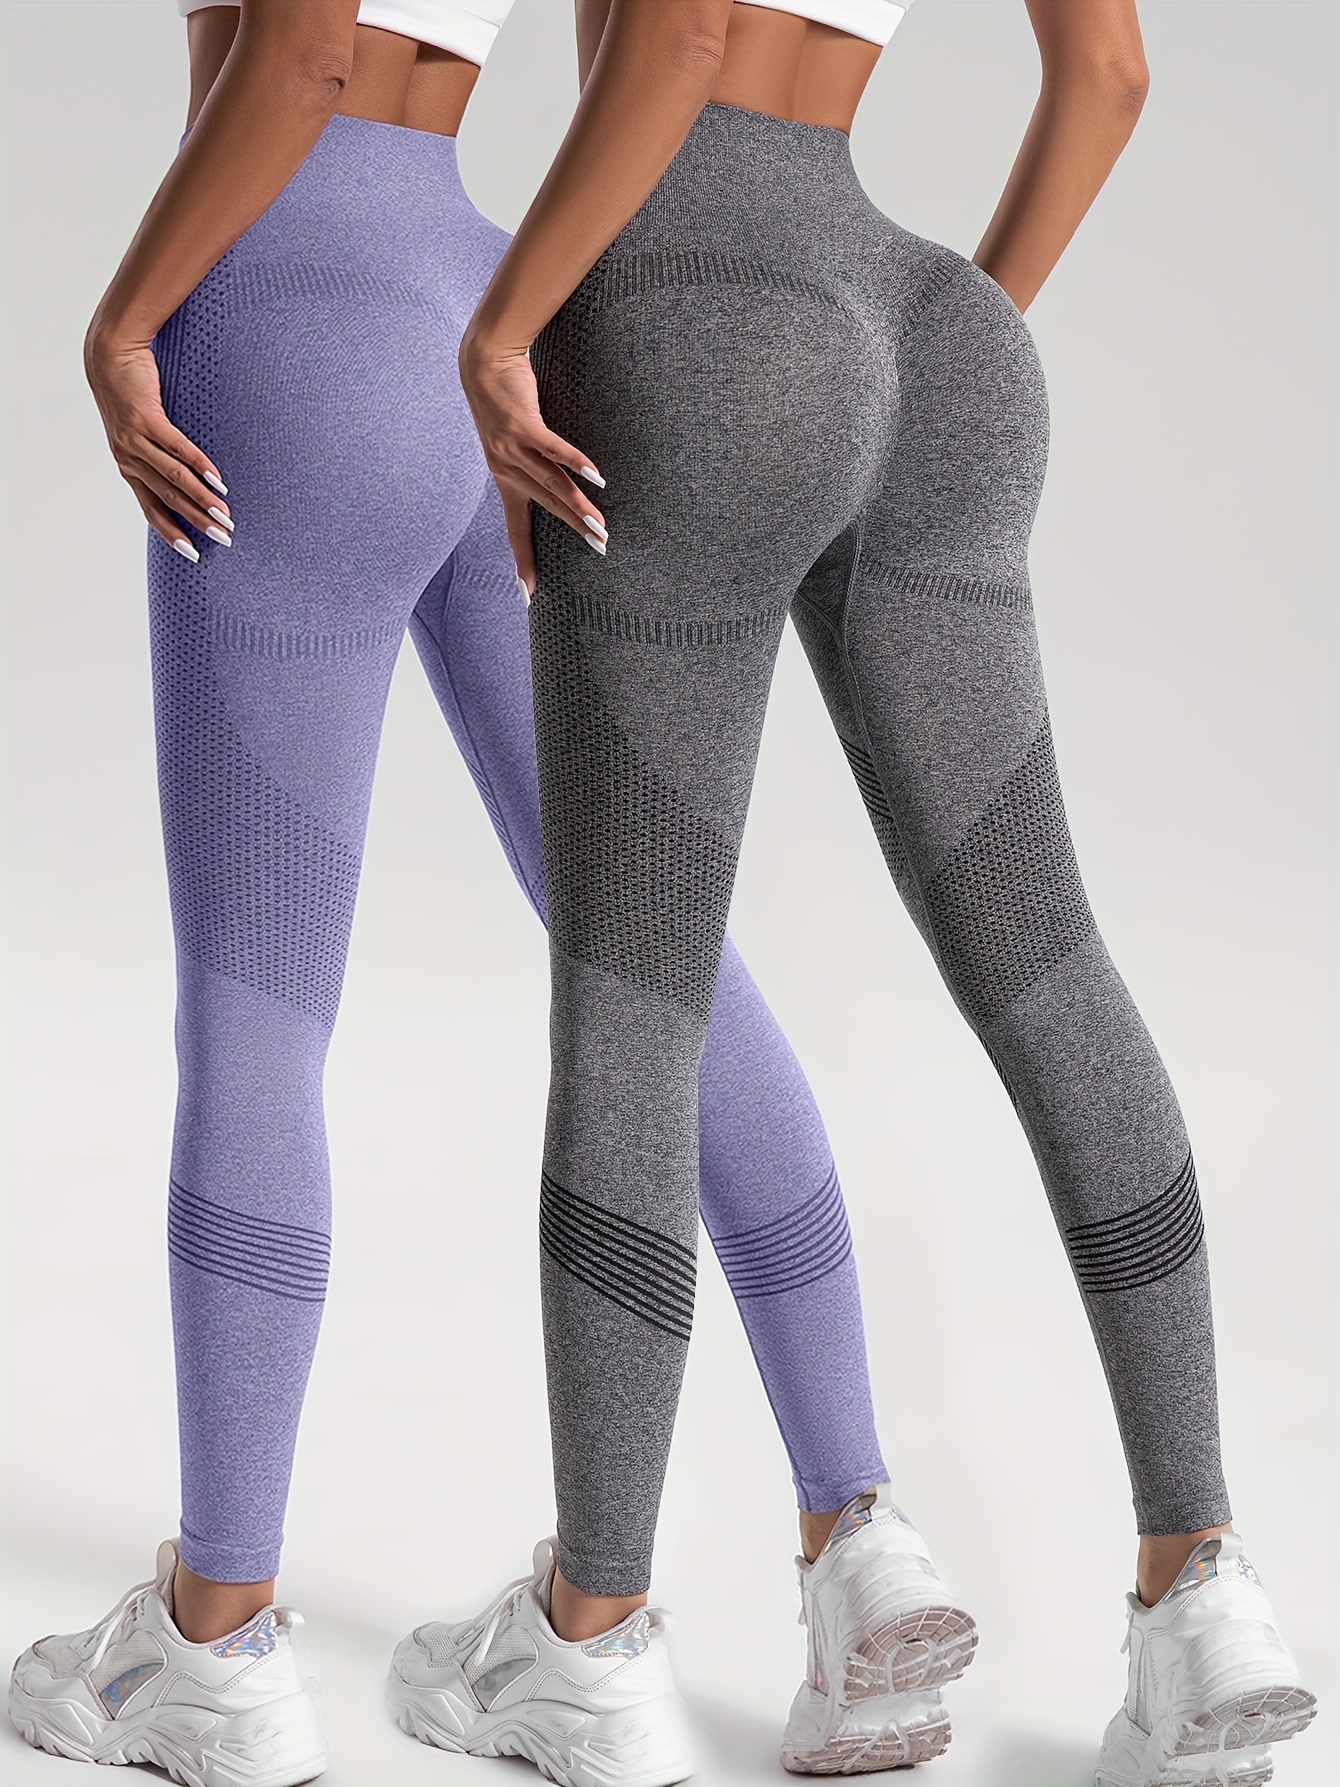 Moisture Absorbing Knitted Yoga Petite Gym Leggings For Women Comfortable  Fit For Running, Sports, And Fitness Workouts From Luyogaworld, $15.53